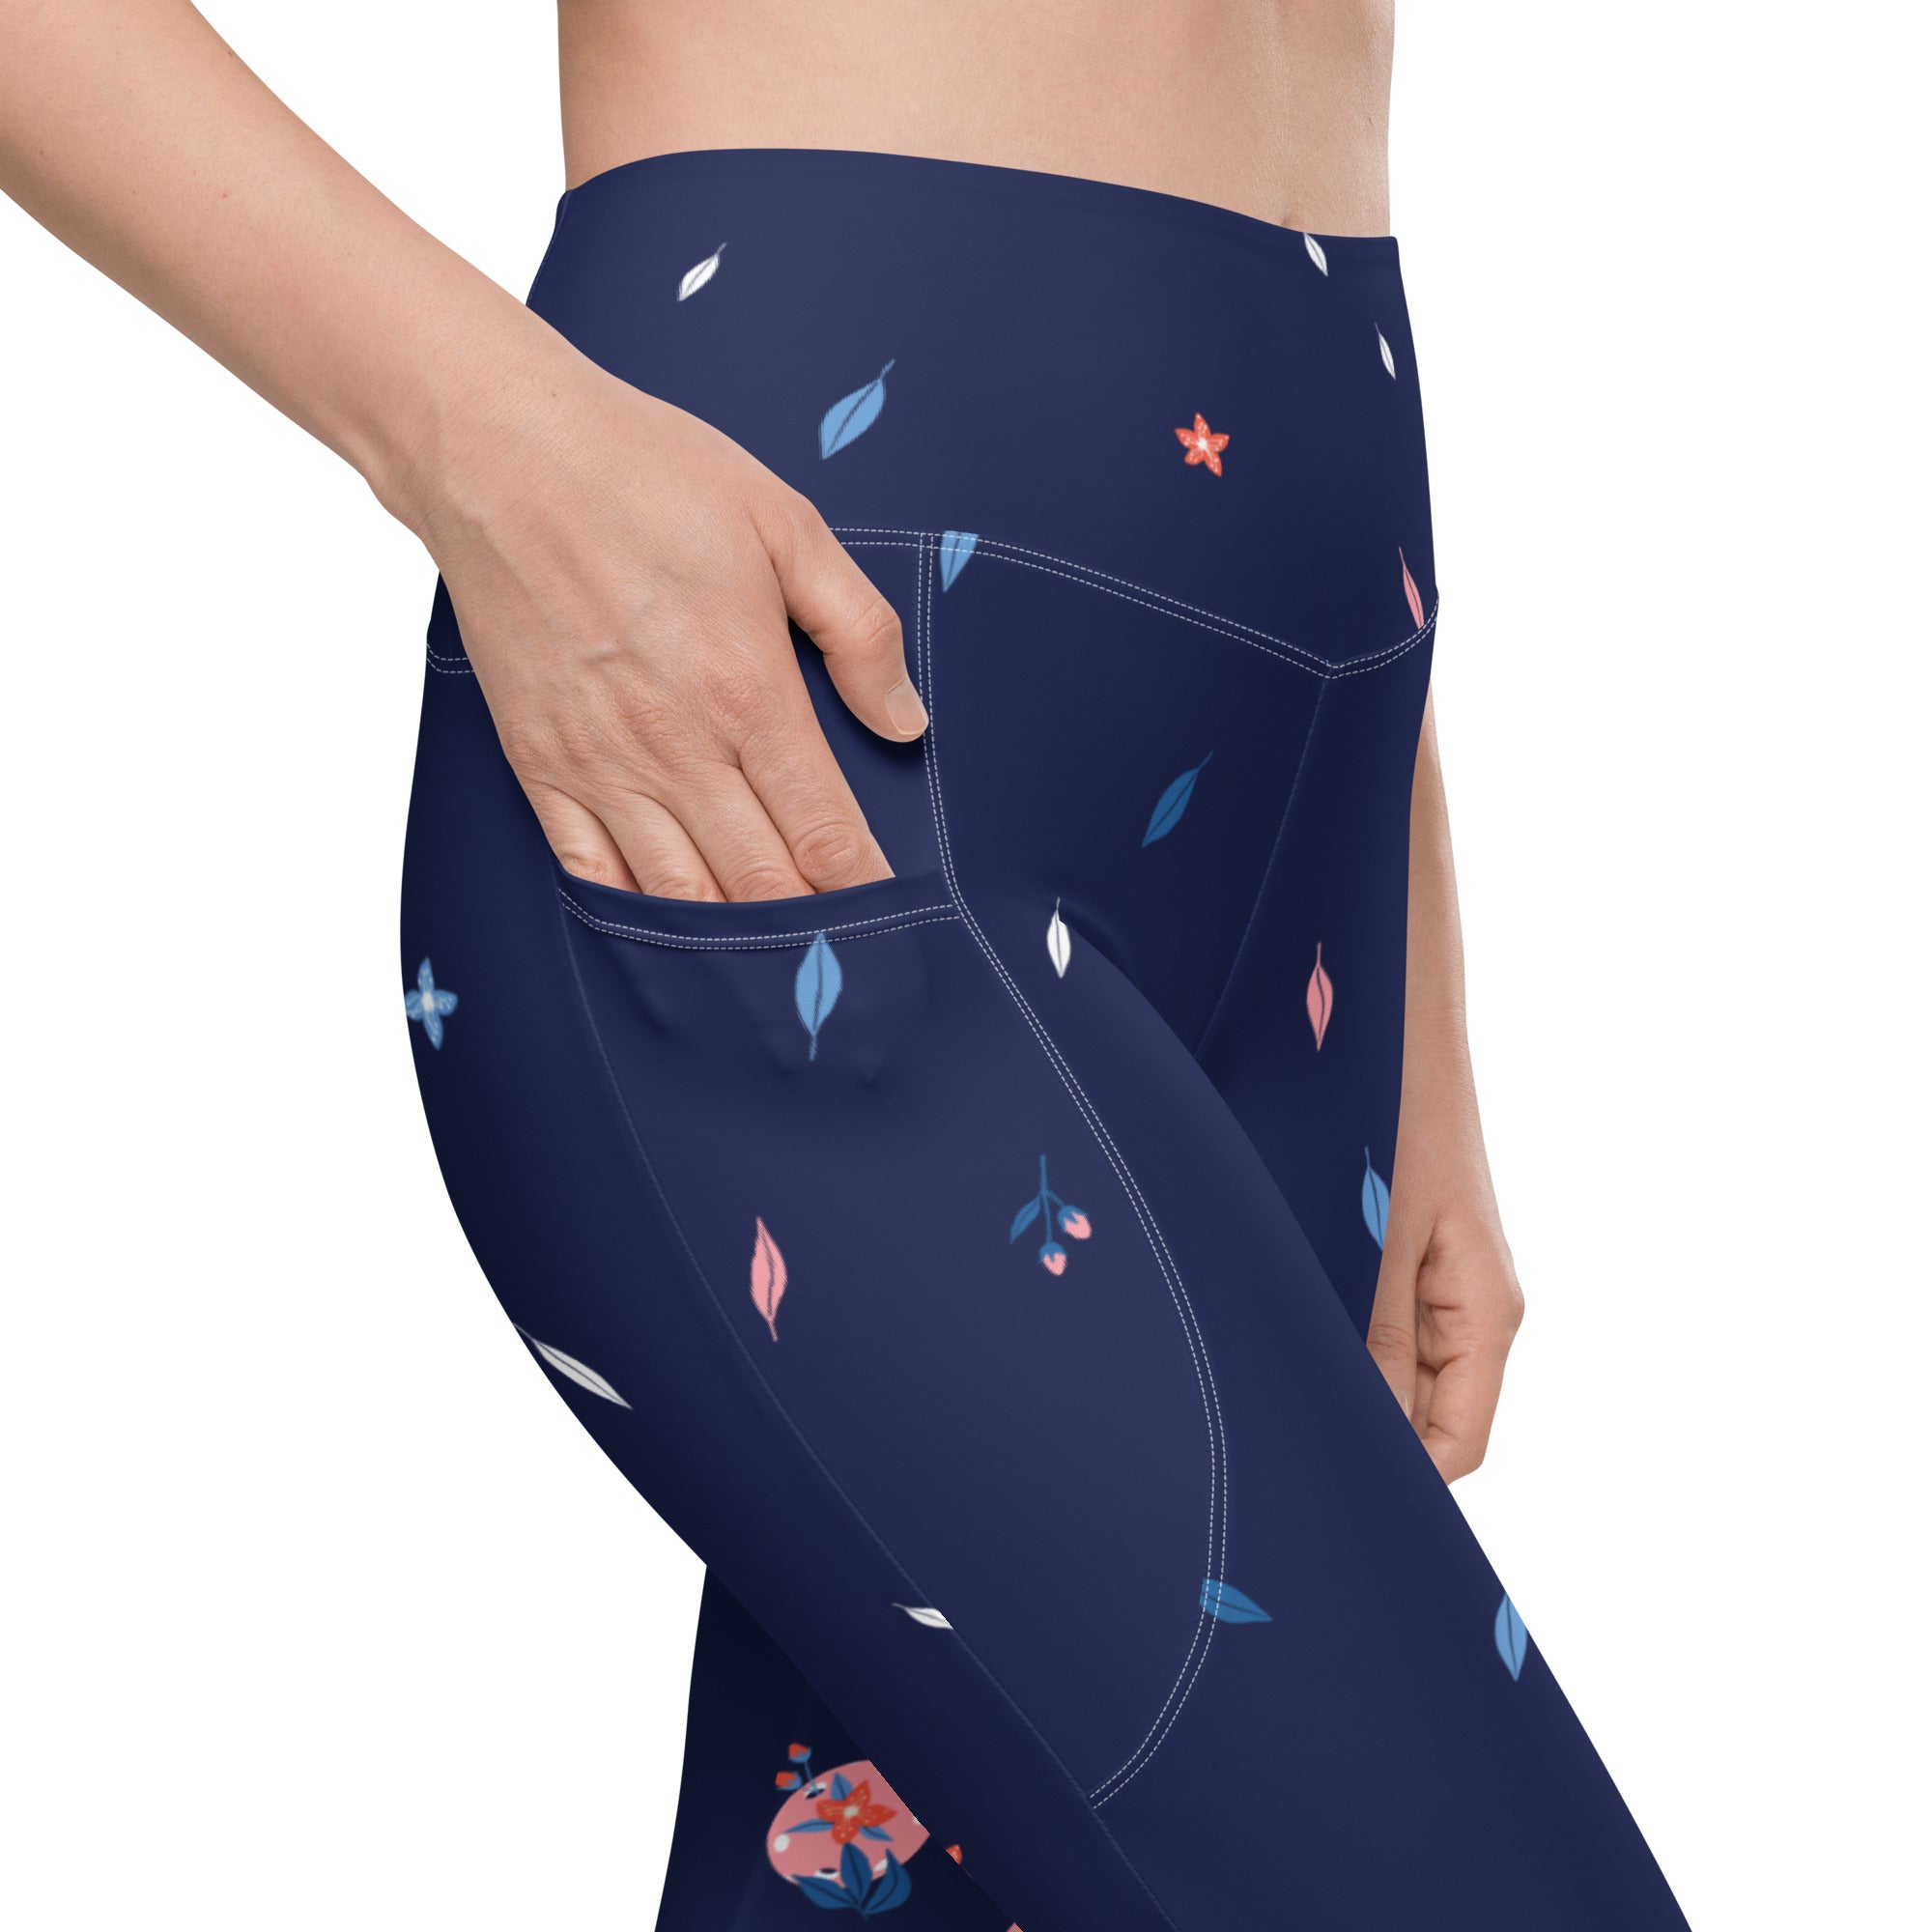 Spring Dink Gradient© Blue High-Waisted Pickleball Performance Leggings with pockets, UPF 50+